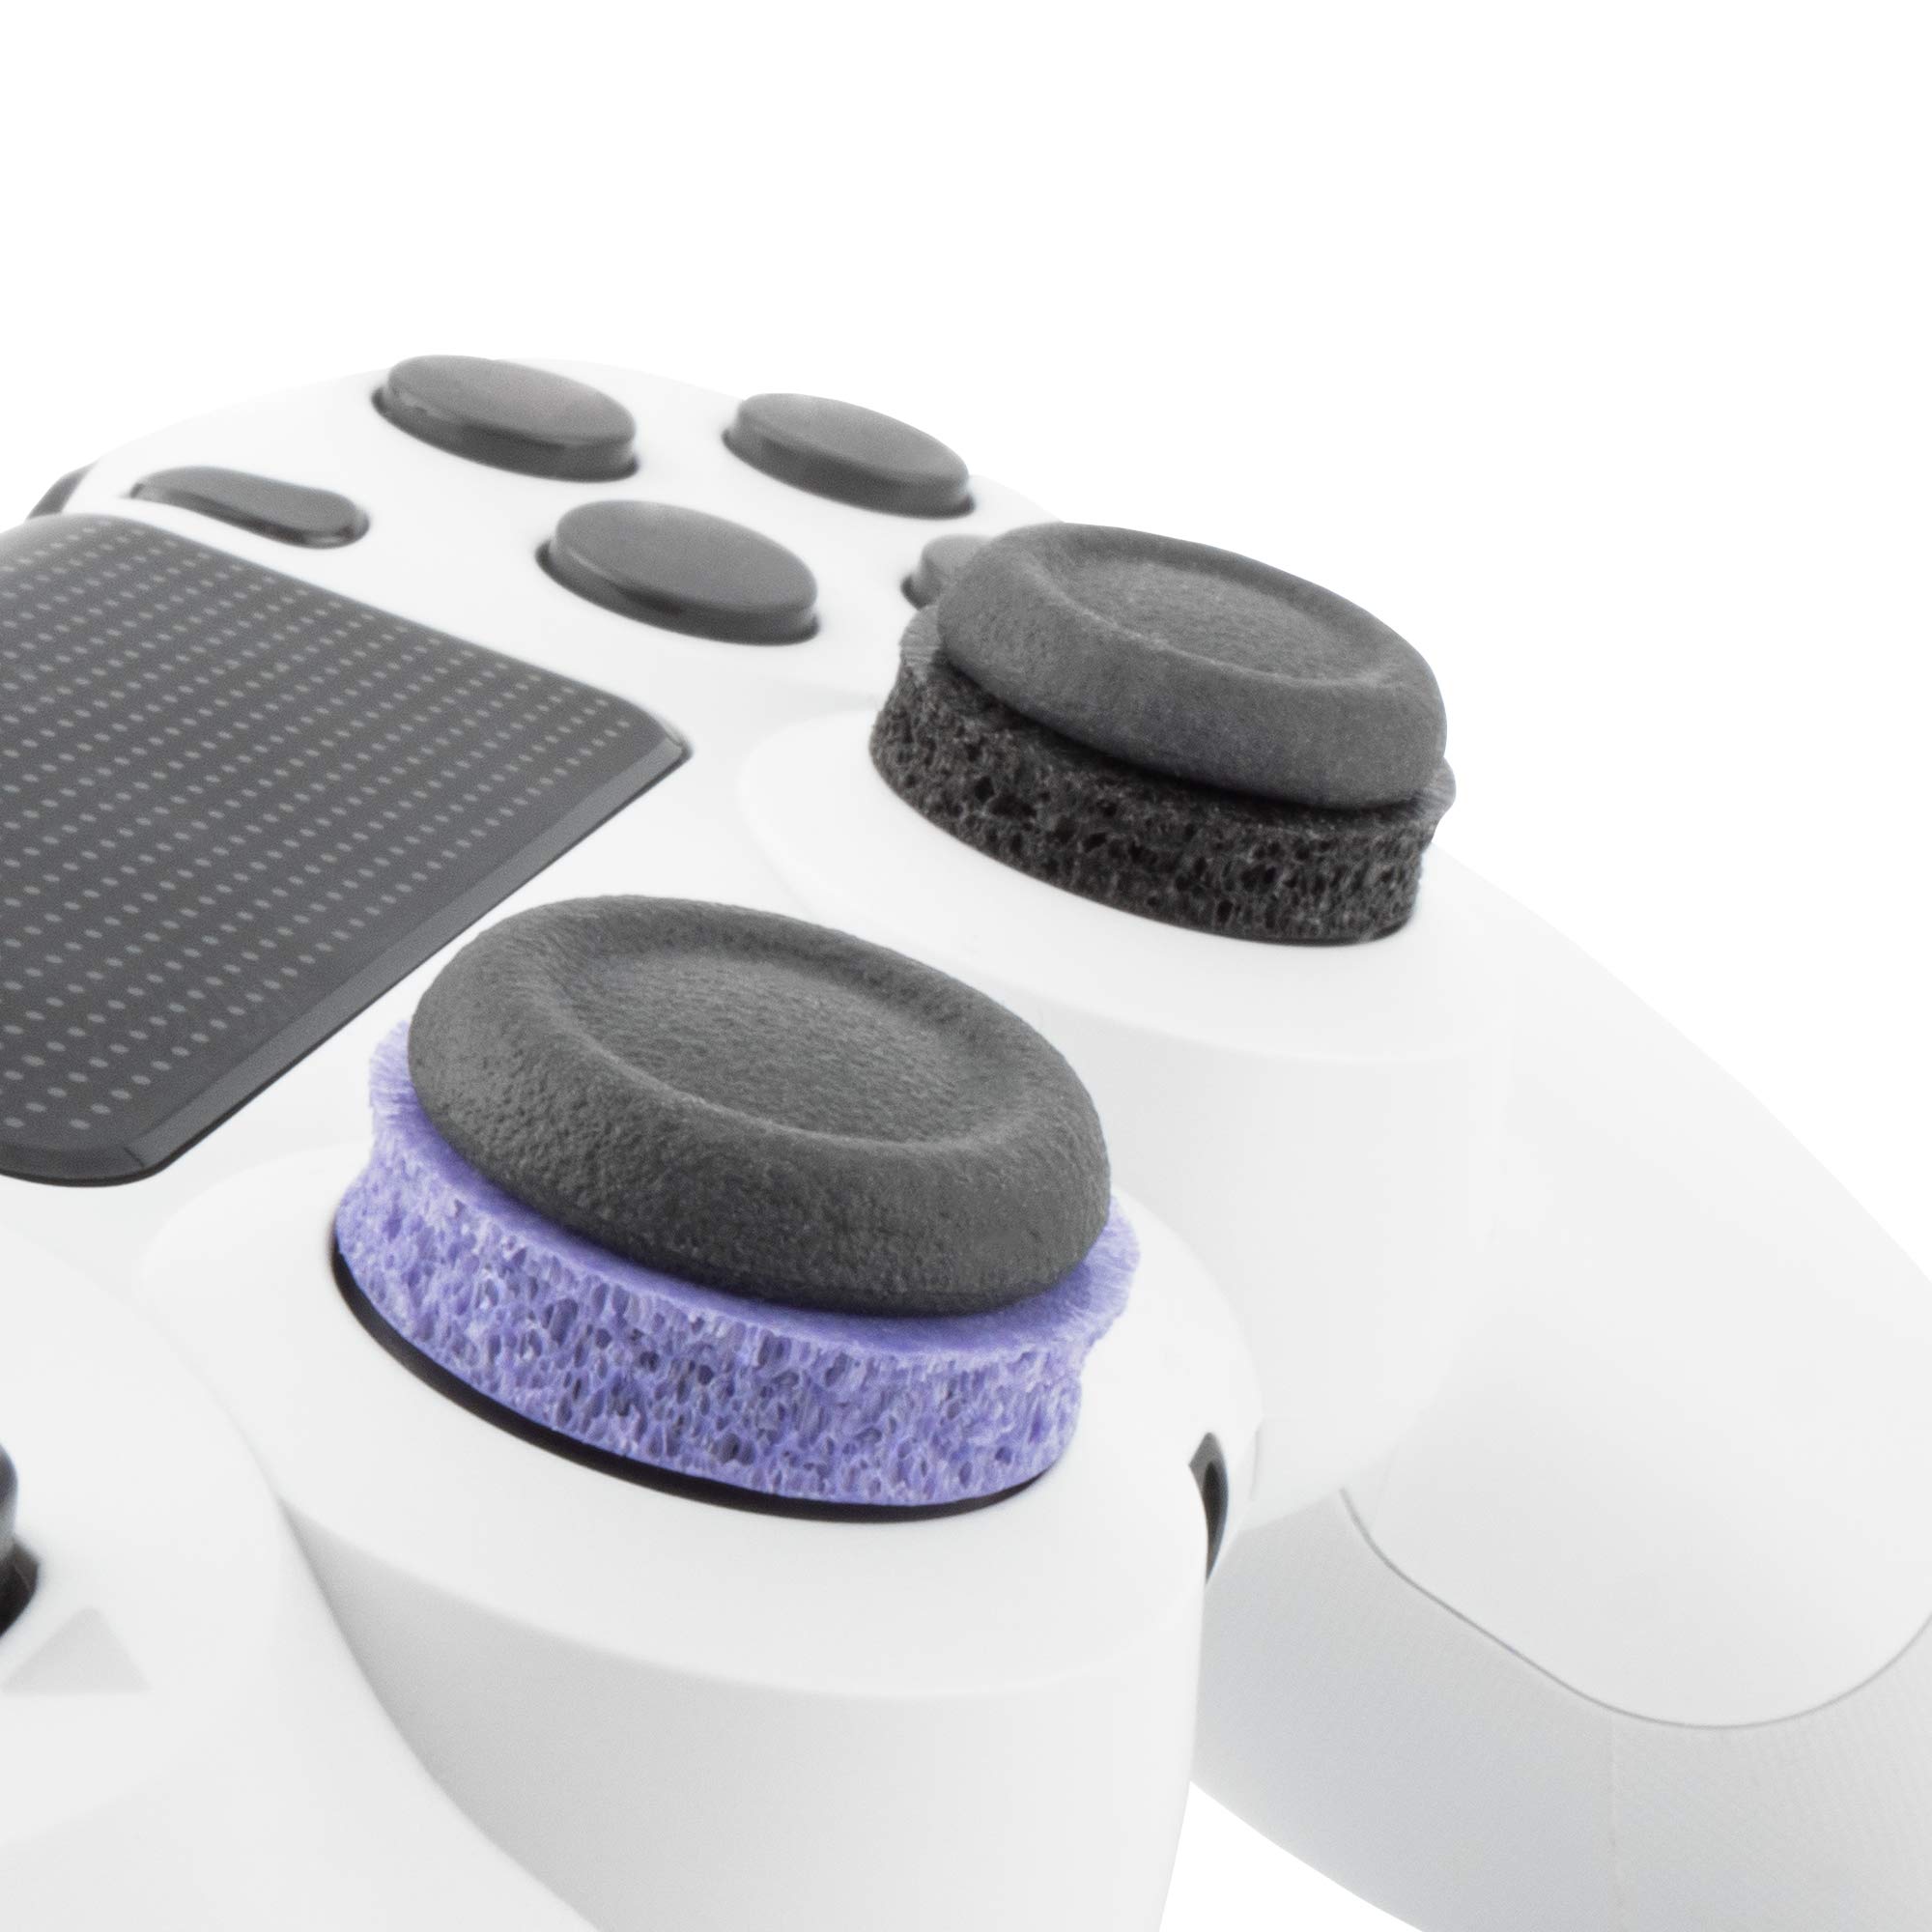 KontrolFreek Precision Rings | Aim Assist Motion Control for PlayStation 4 (PS4), Xbox One, Switch Pro & Scuf Controller (Black/Purple)